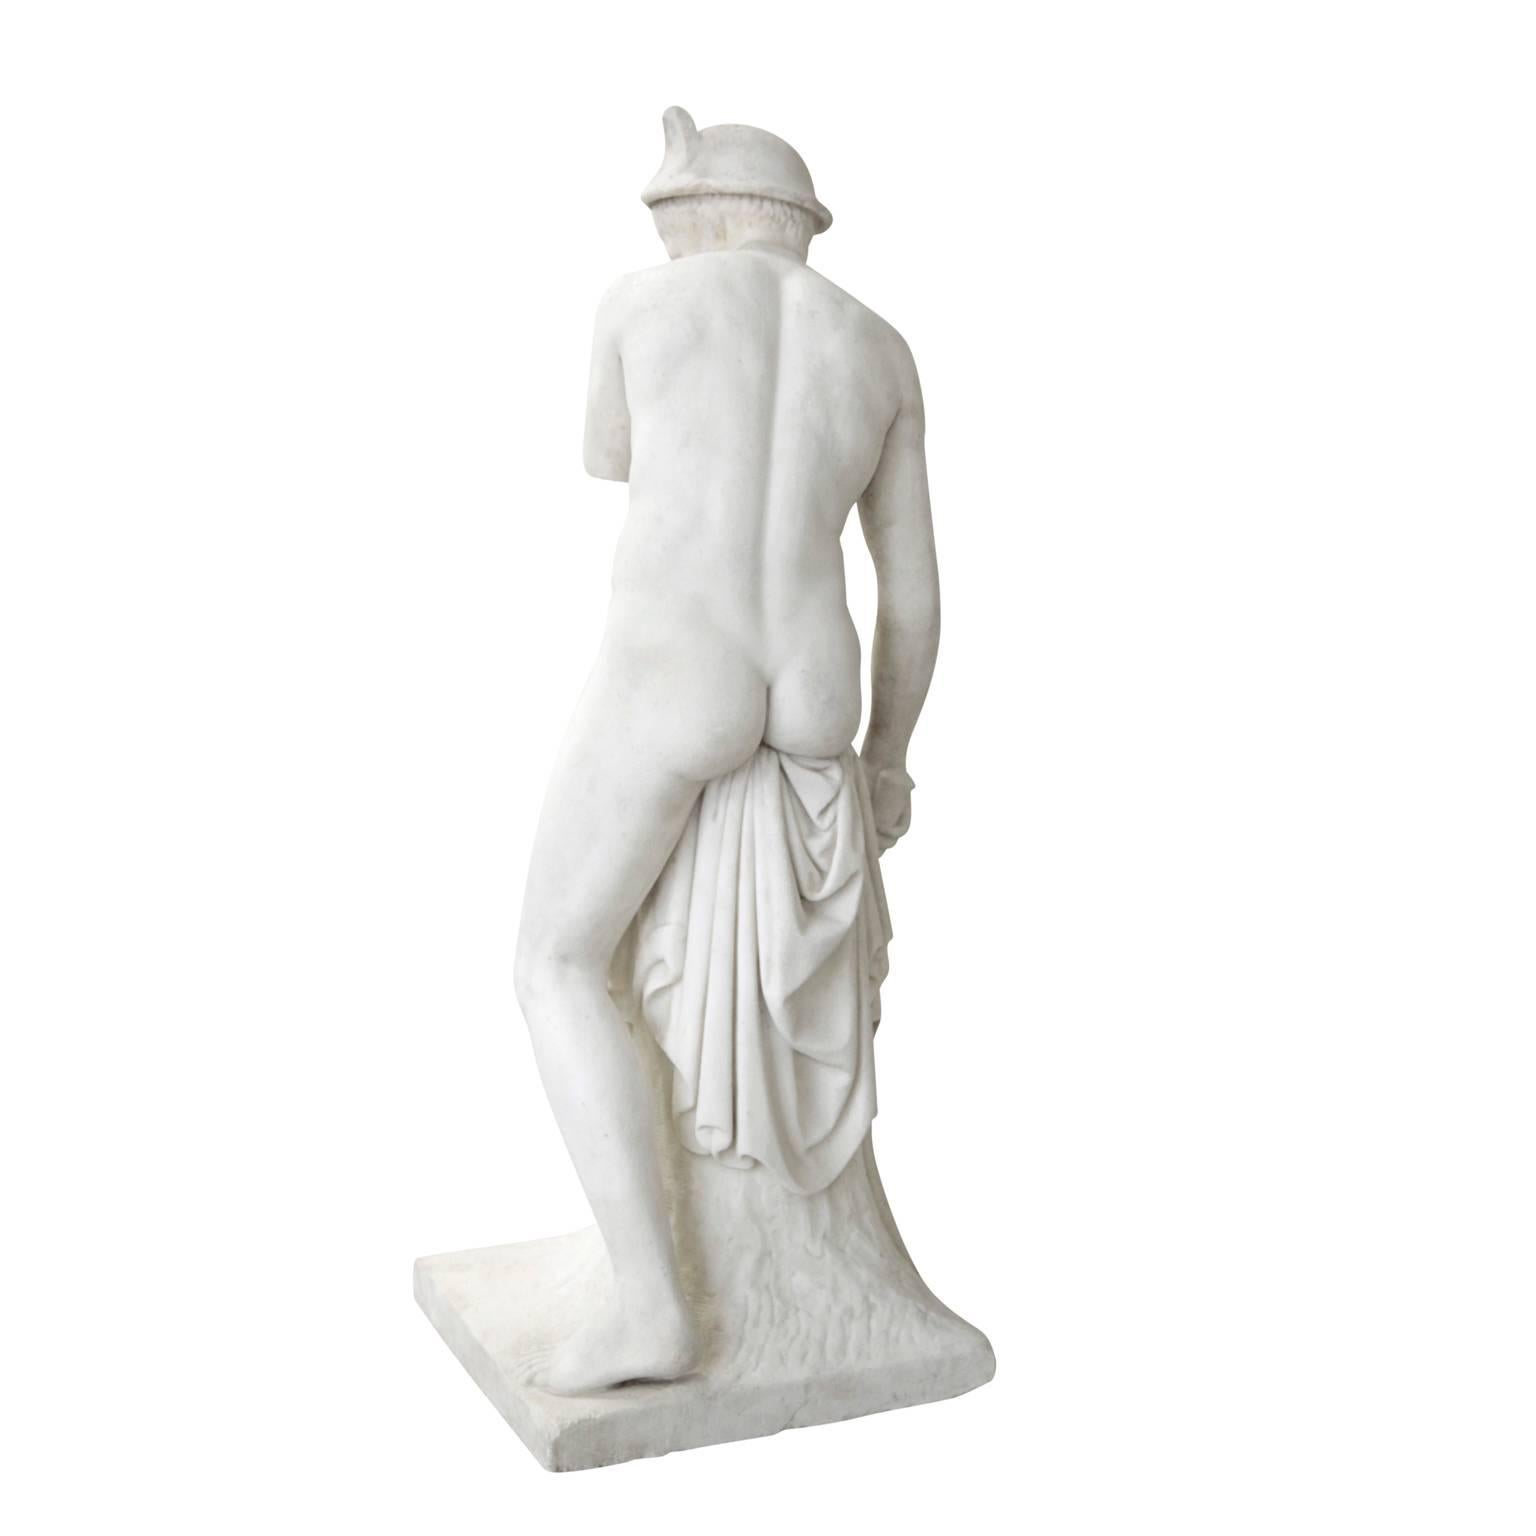 Marble sculpture of Hermes, early 19th century.
The naked Hermes sits on a tree stump over which he has thrown some sort of cloth. His left leg supports himself while the right leg is swung over the stump. His right foot is missing. His upper body